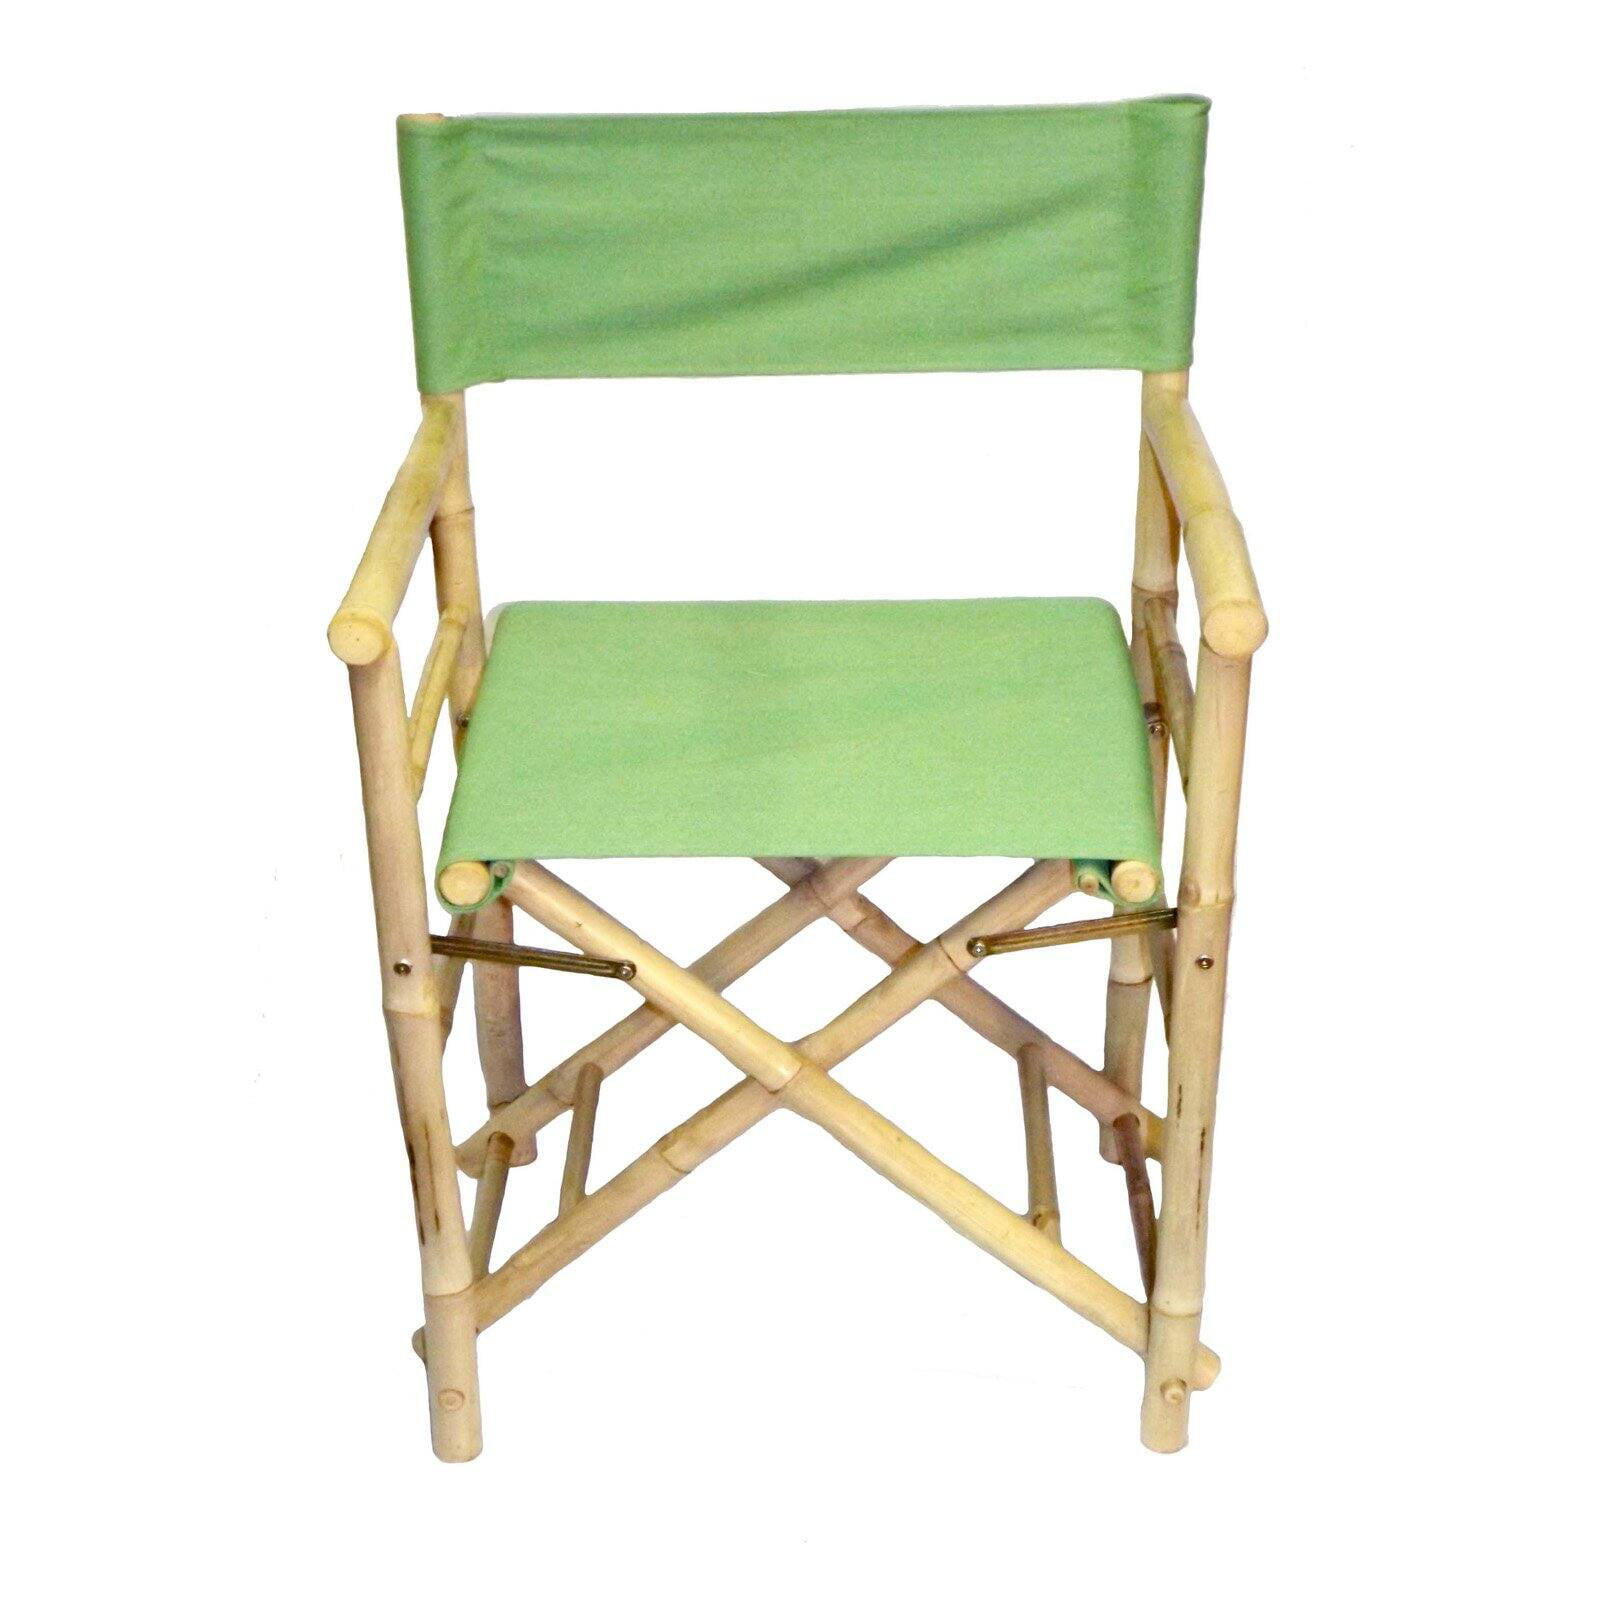 37 L x 24 W x 33 H Green Zew Handcrafted Foldable Bamboo Portable Backyard Sling Chair with Treated Canvas 